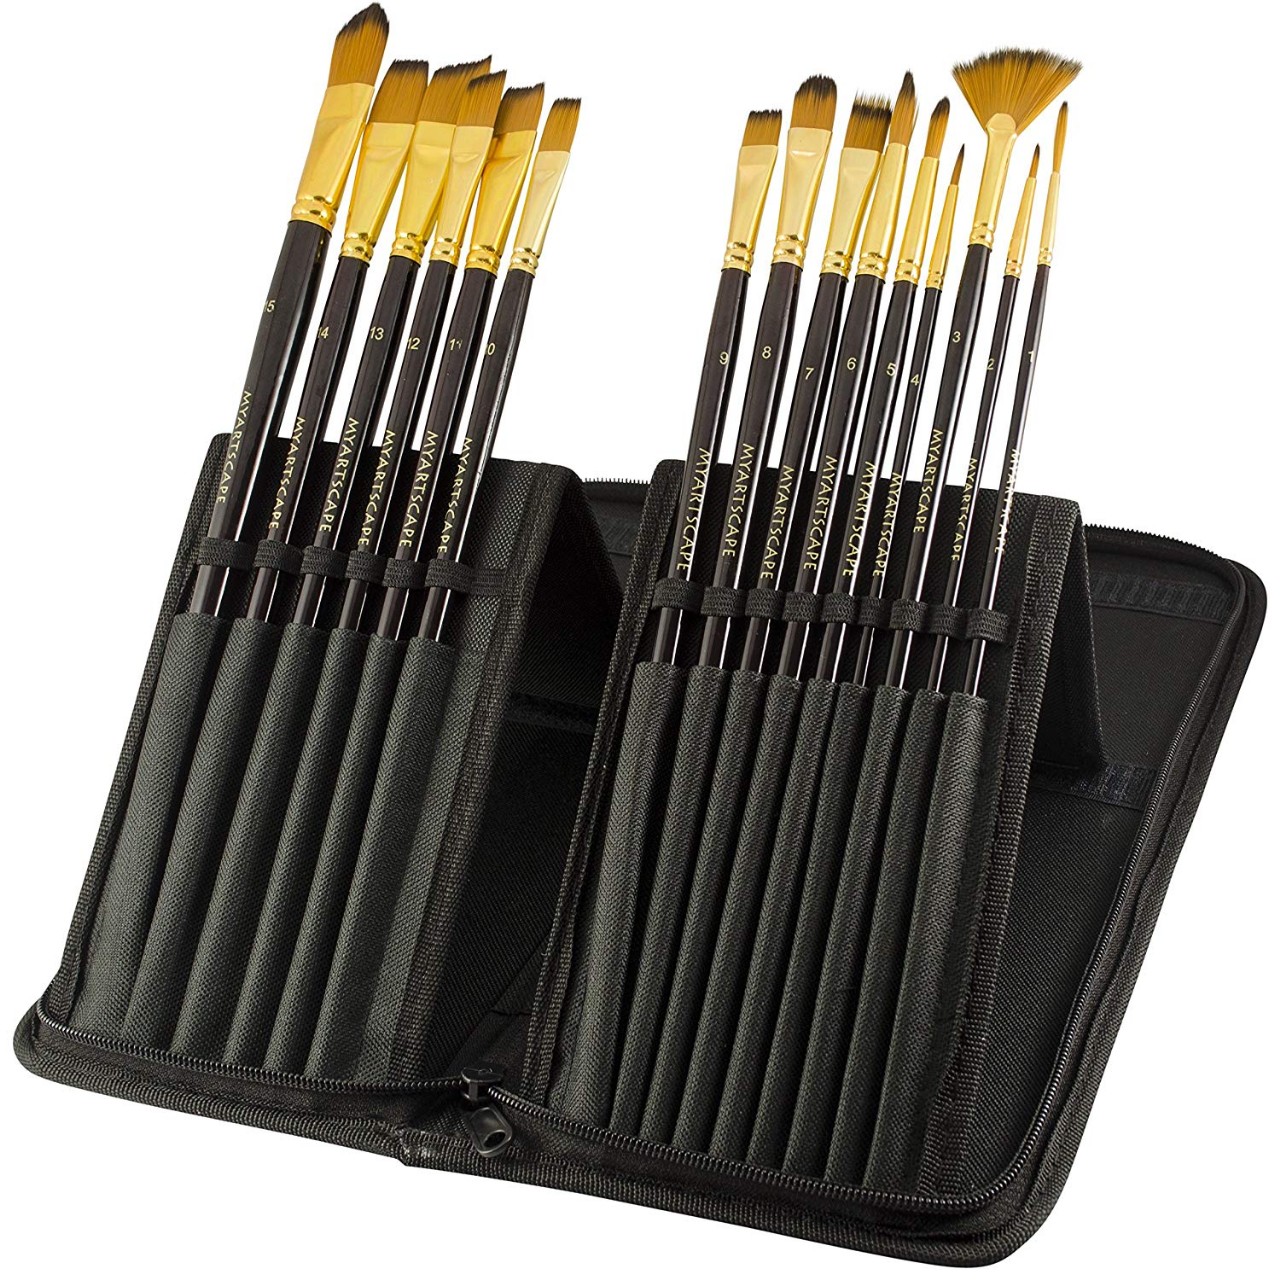 Paint Brushes - 15 Pc Brush Set for Watercolor, Acrylic, Oil & Face Painting | Long Handle Artist